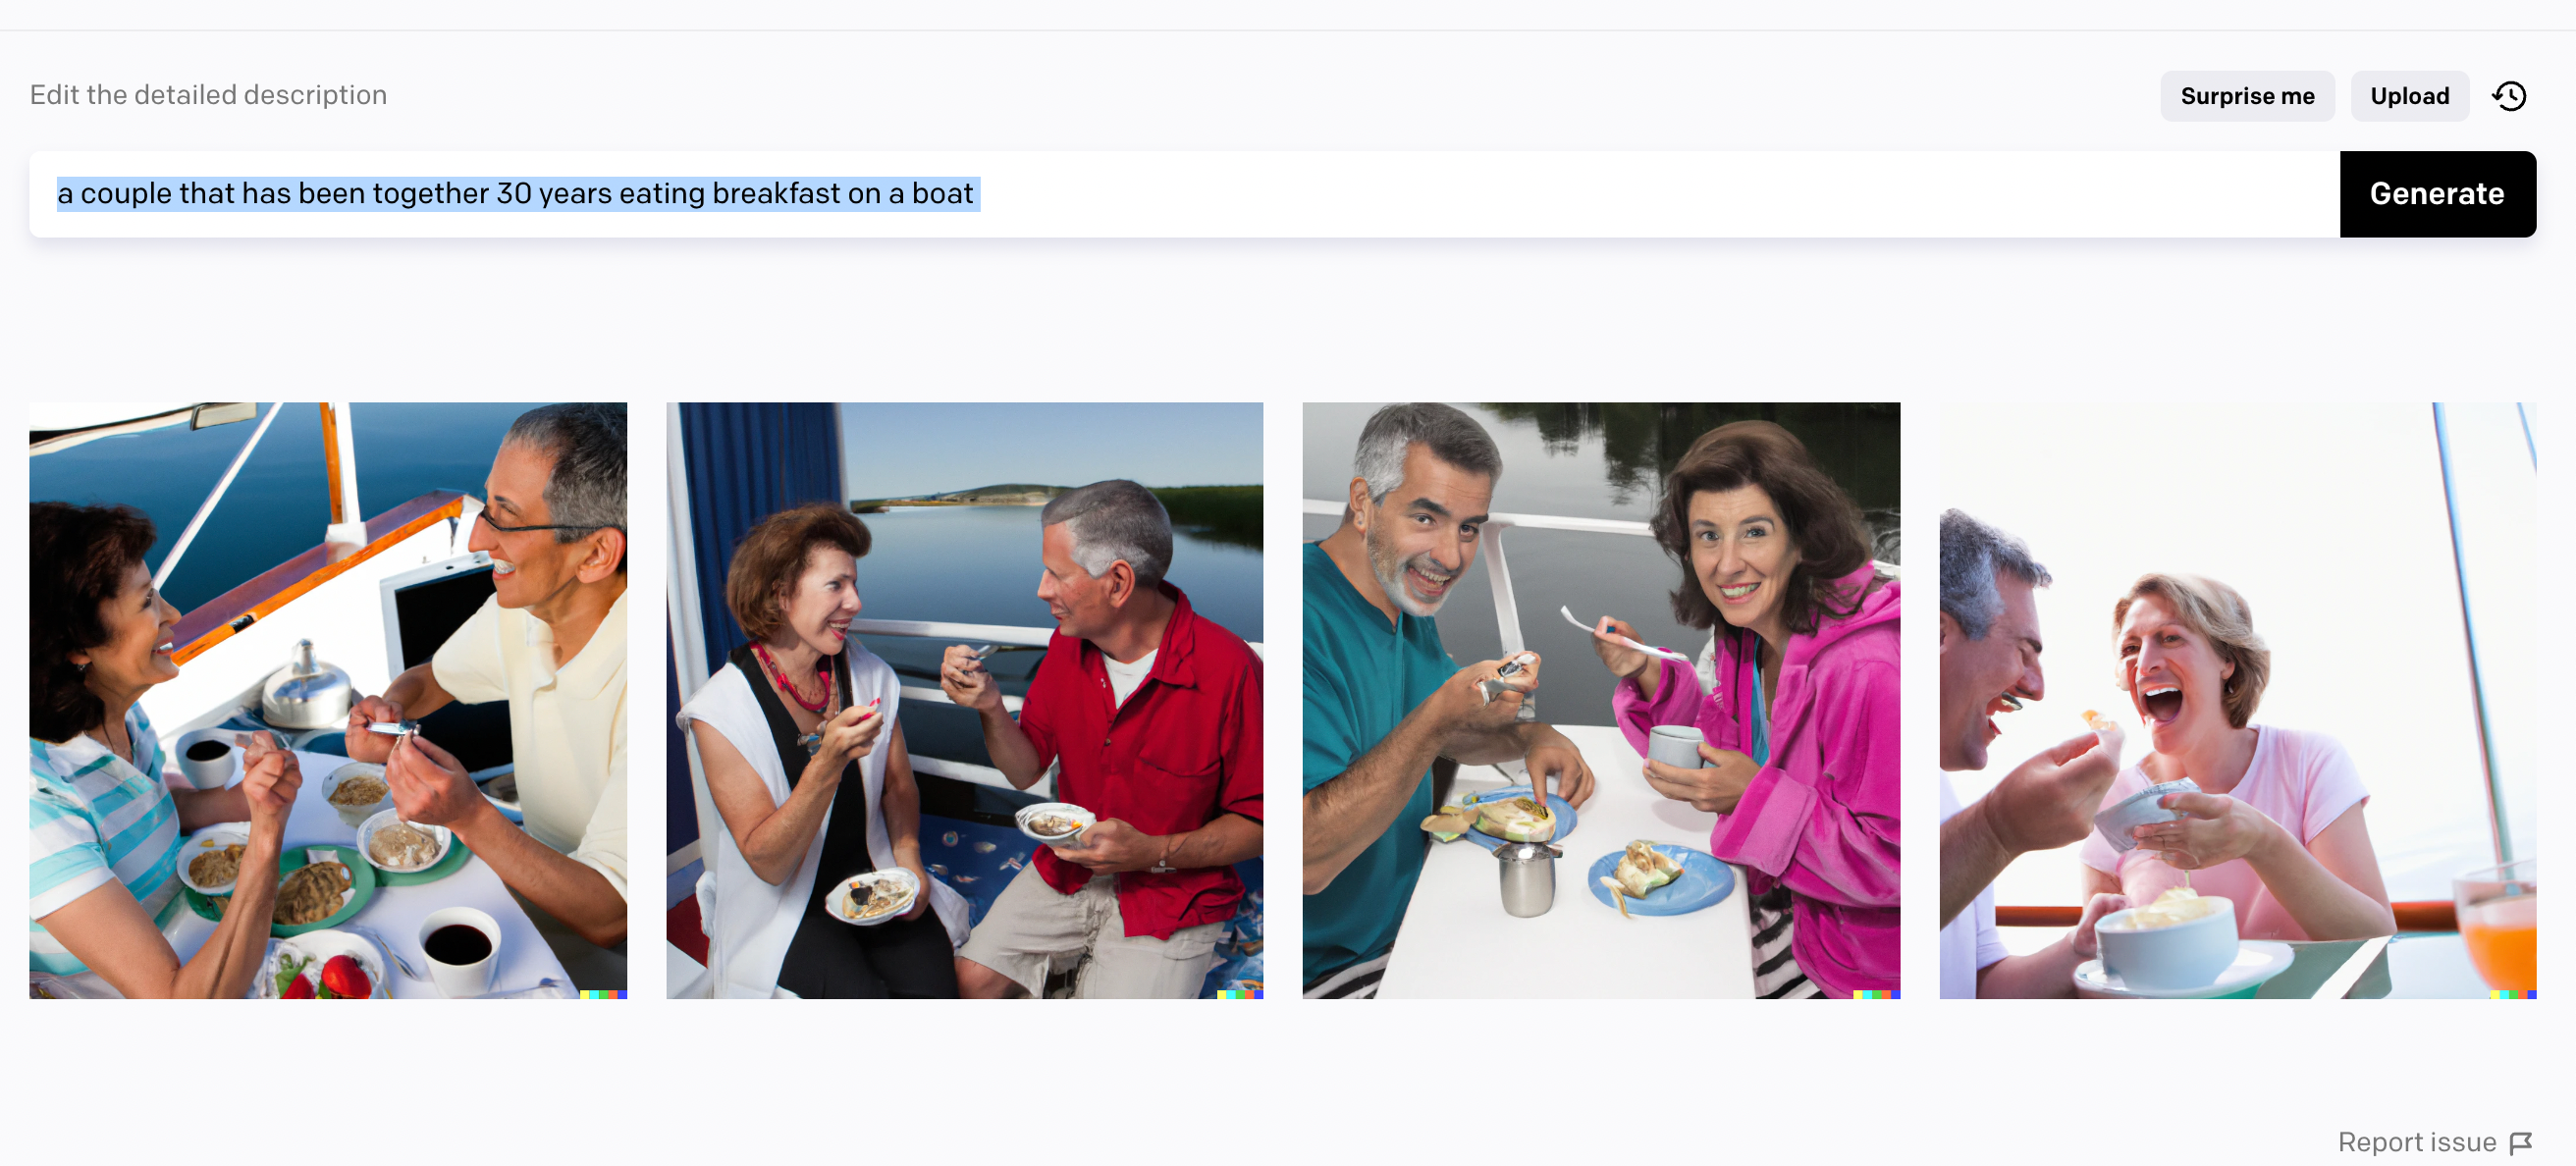 A grid of couples eating breakfast on a boat. (Yes, all white.)